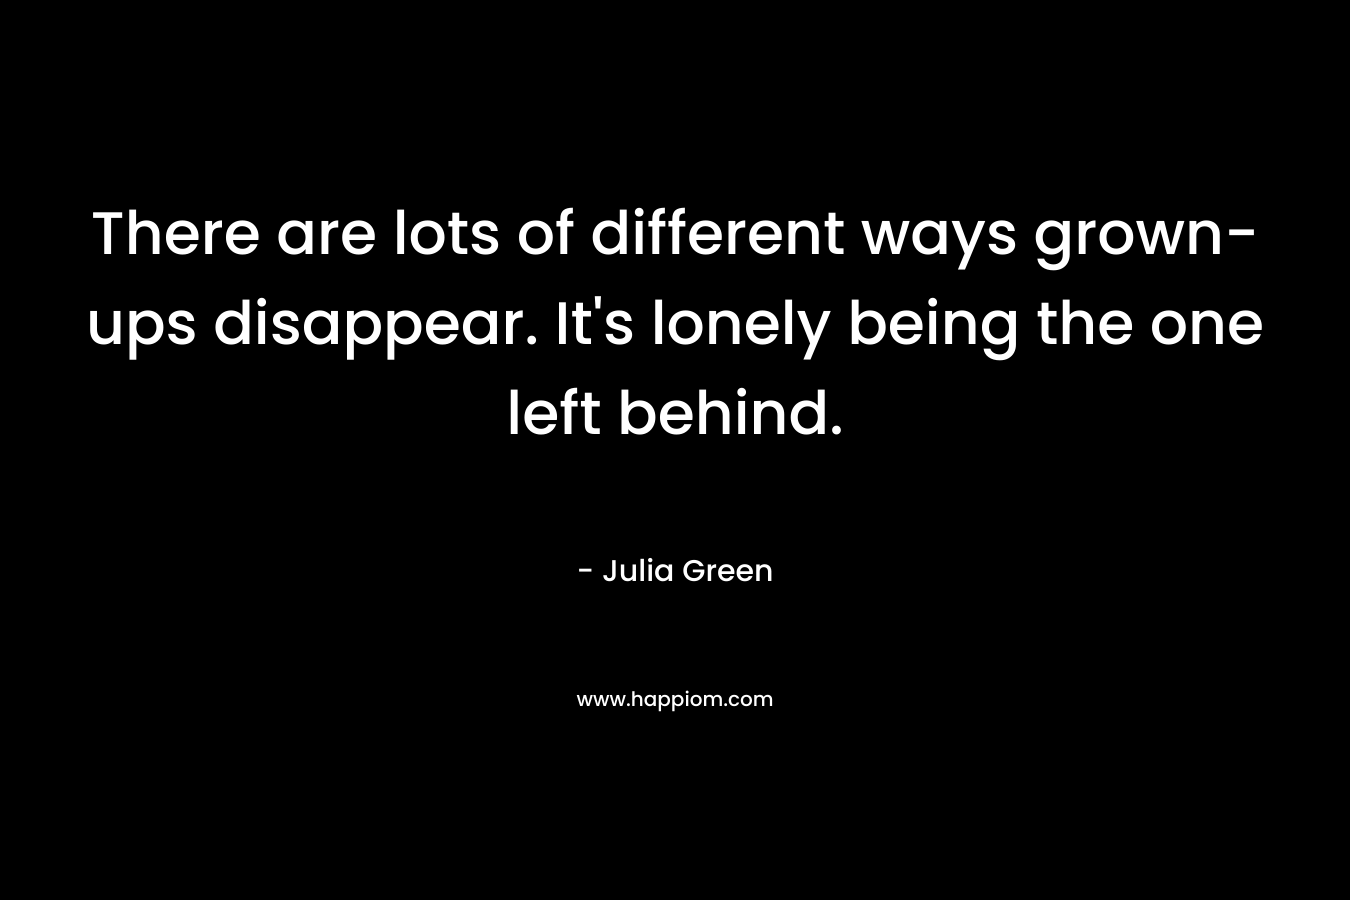 There are lots of different ways grown-ups disappear. It's lonely being the one left behind.